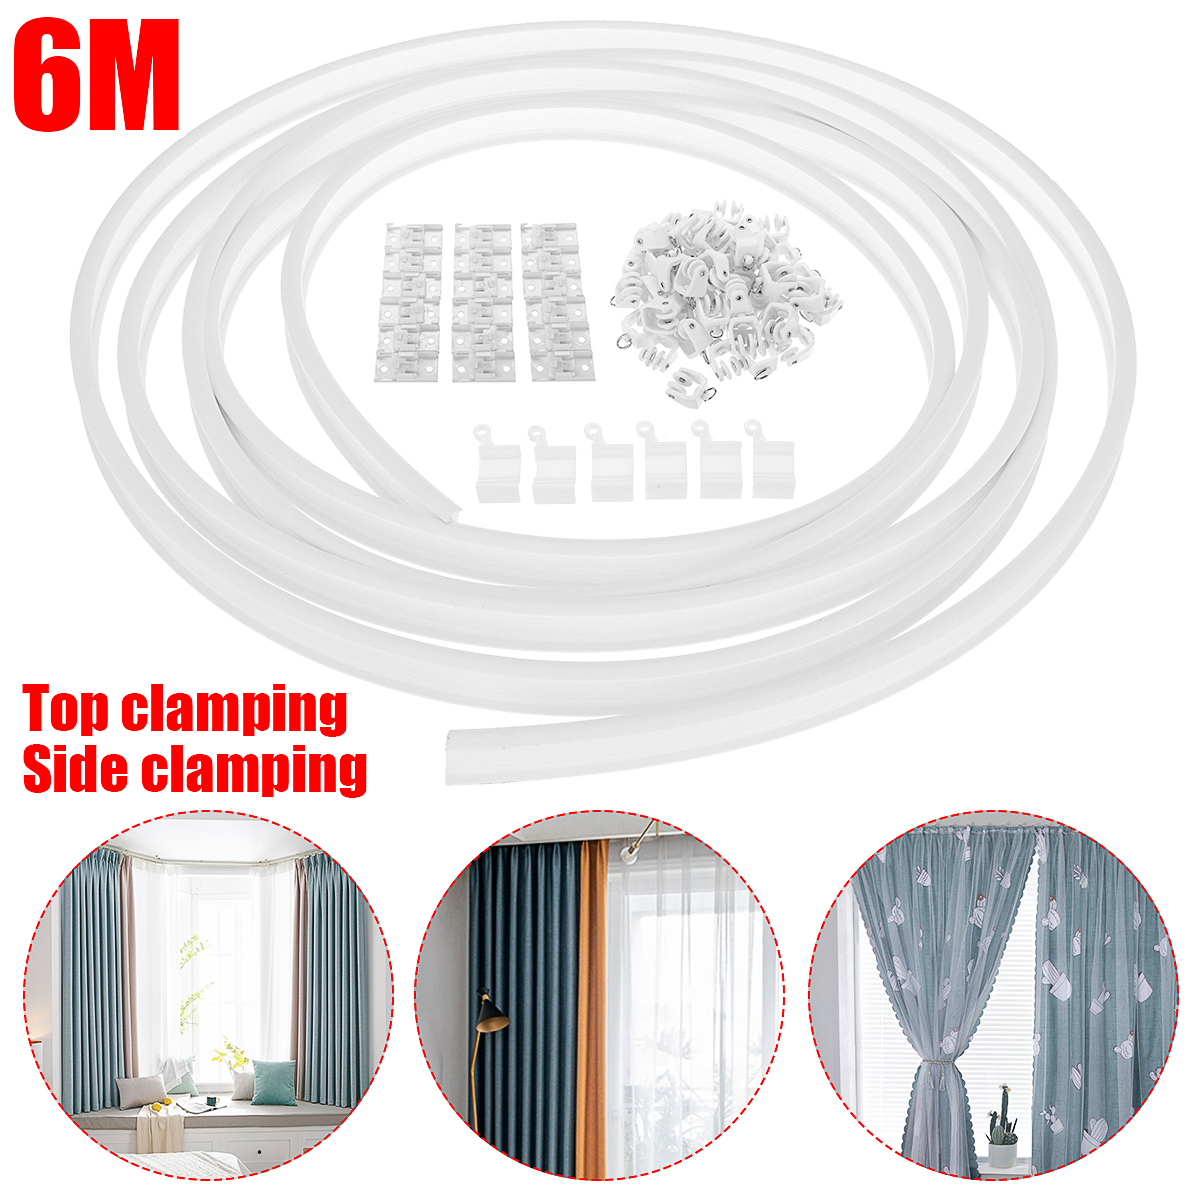 6M-Flexible-Ceiling-Curtain-Track-Bendable-Window-Rod-Rail-Straight-Curve-Shower-1845745-4